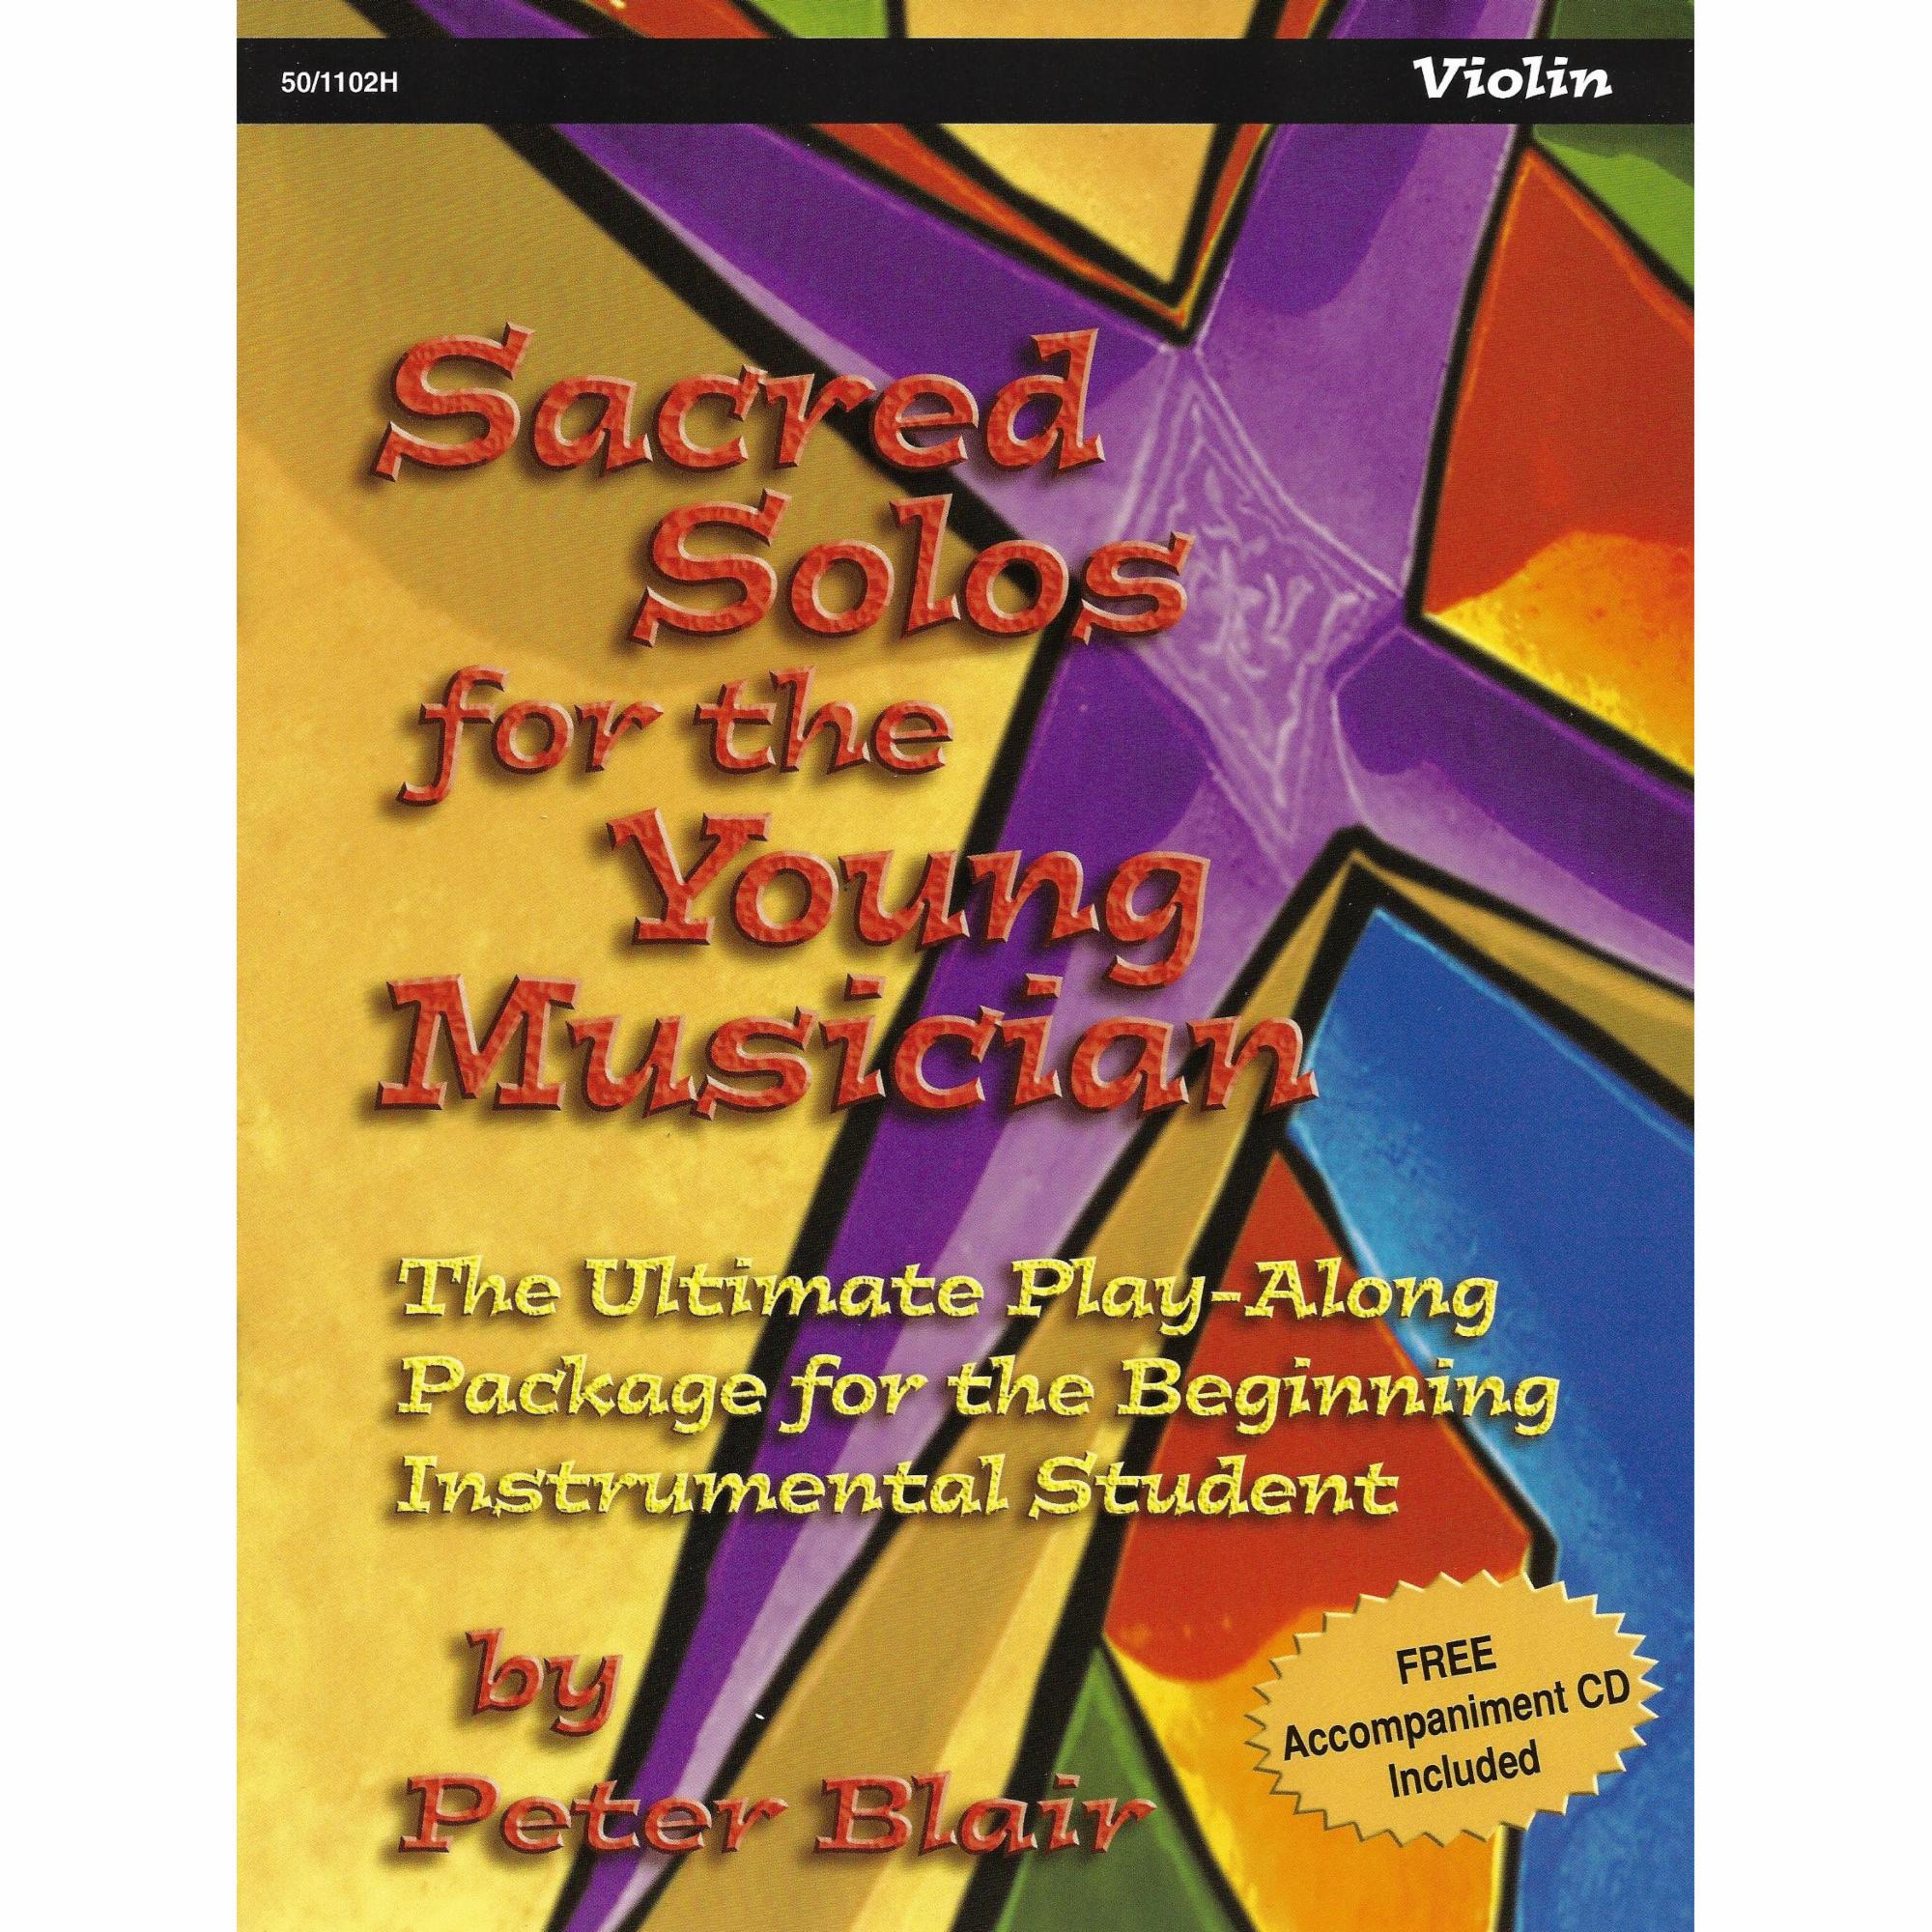 Sacred Solos for the Young Musician for Violin, Viola, or Cello